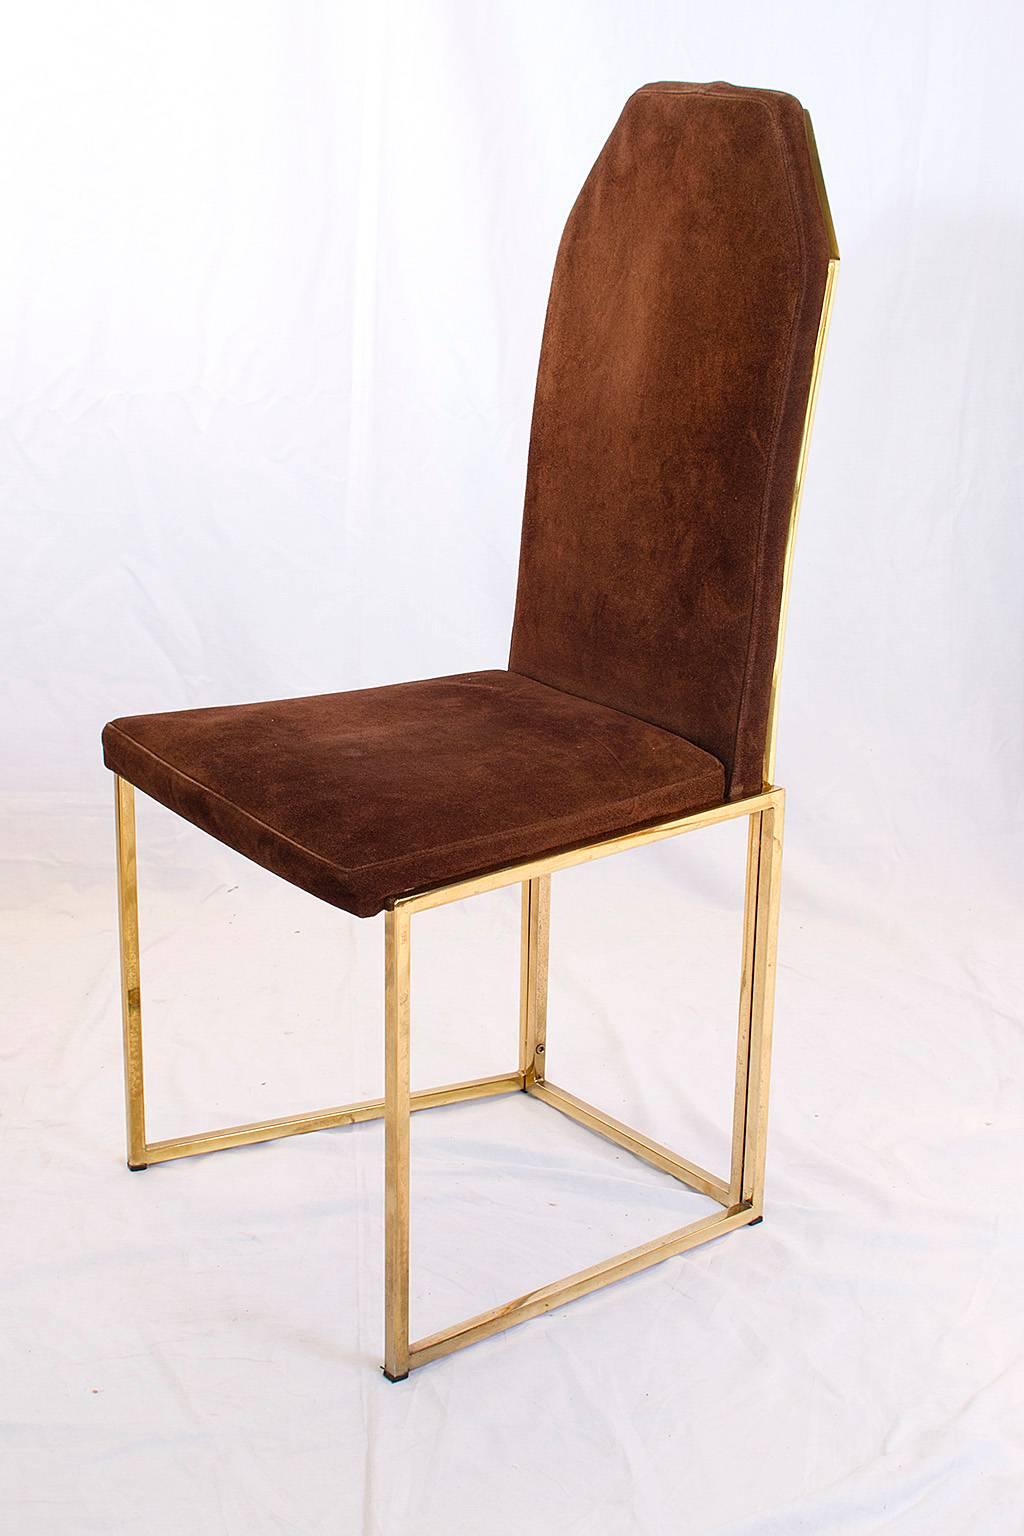 Belgian Six Golden Lacquered Steel and Suede Chairs by Belgo Chrome